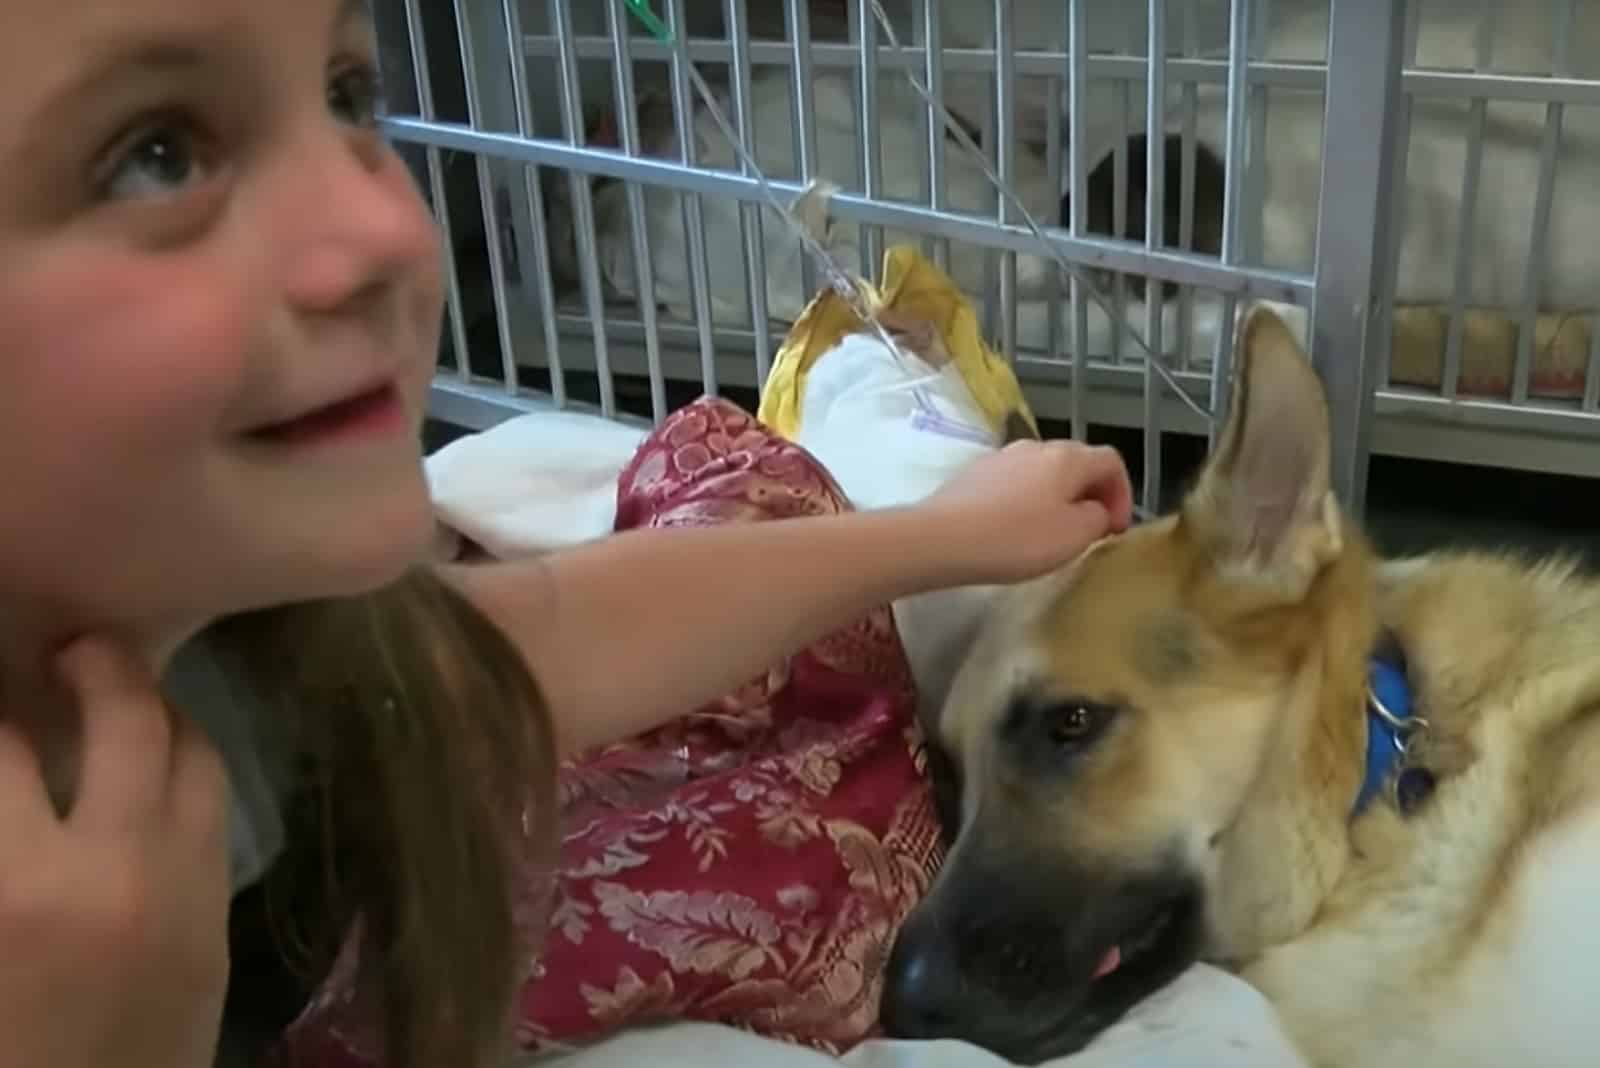 Haus the brave GSD and the girl whom he had saved